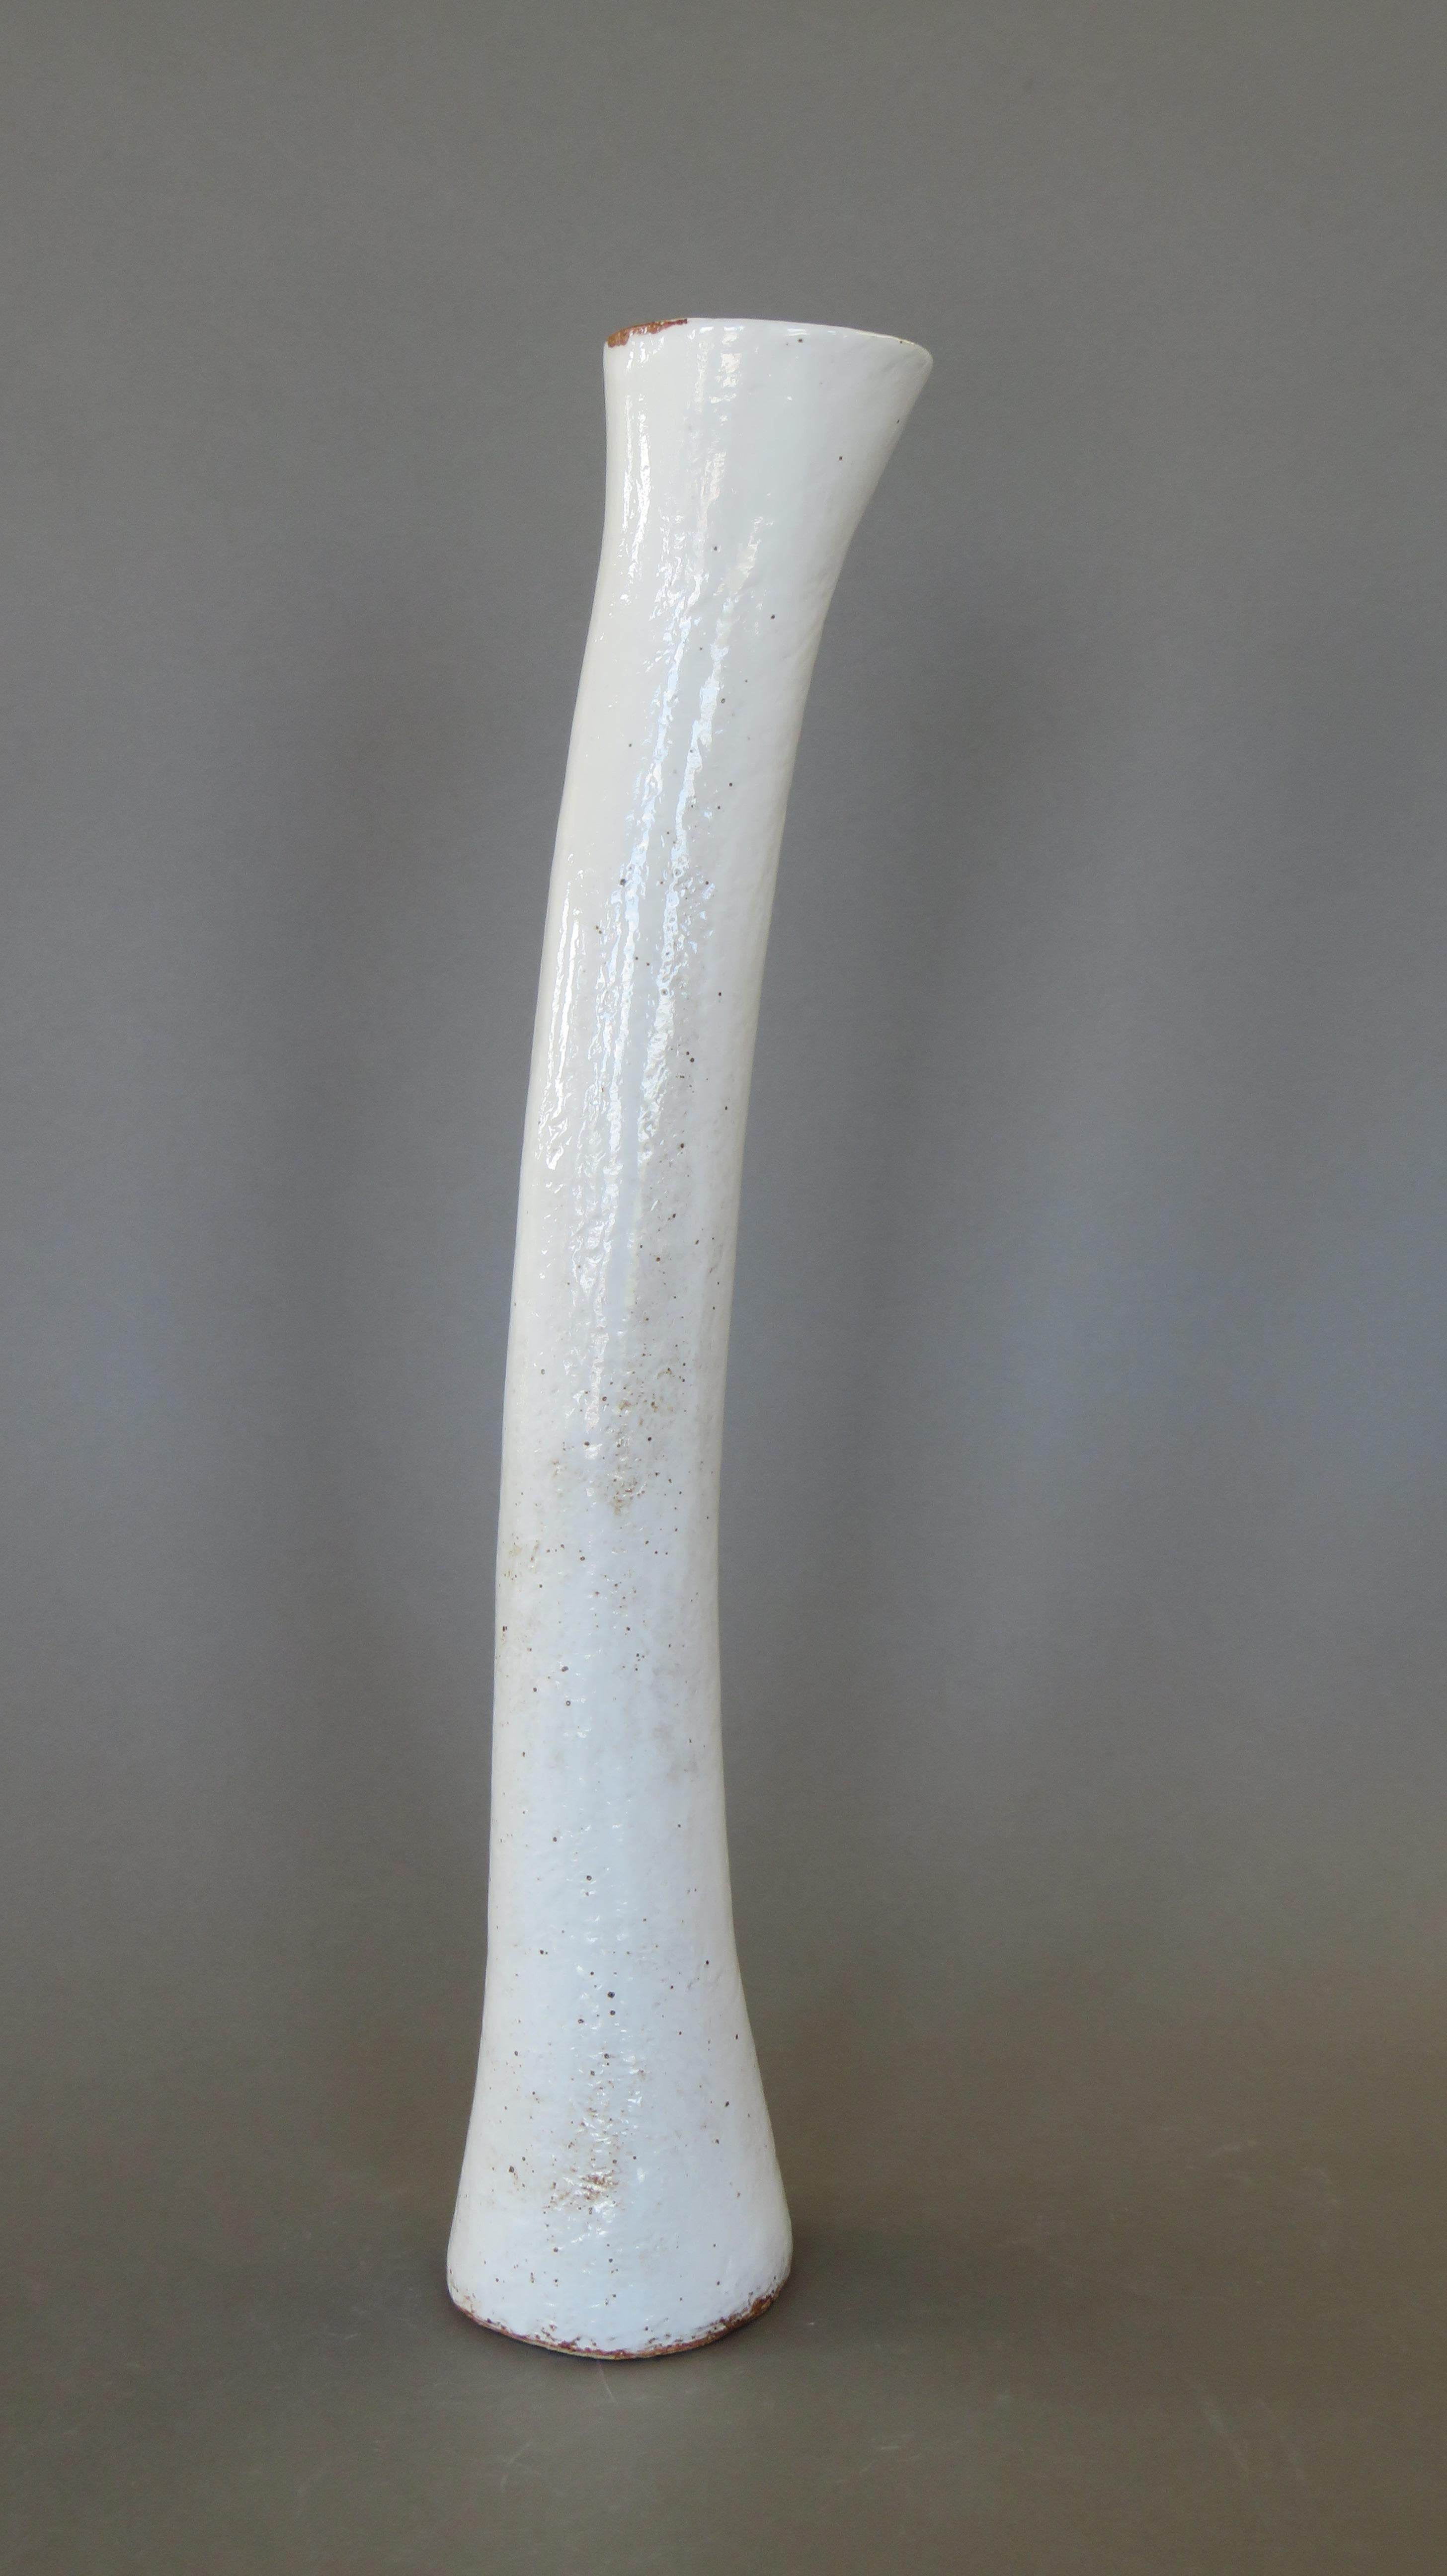 Hand-Crafted Tall Arcing Ceramic Vase, White Glaze with Brown Edge, Hand Built